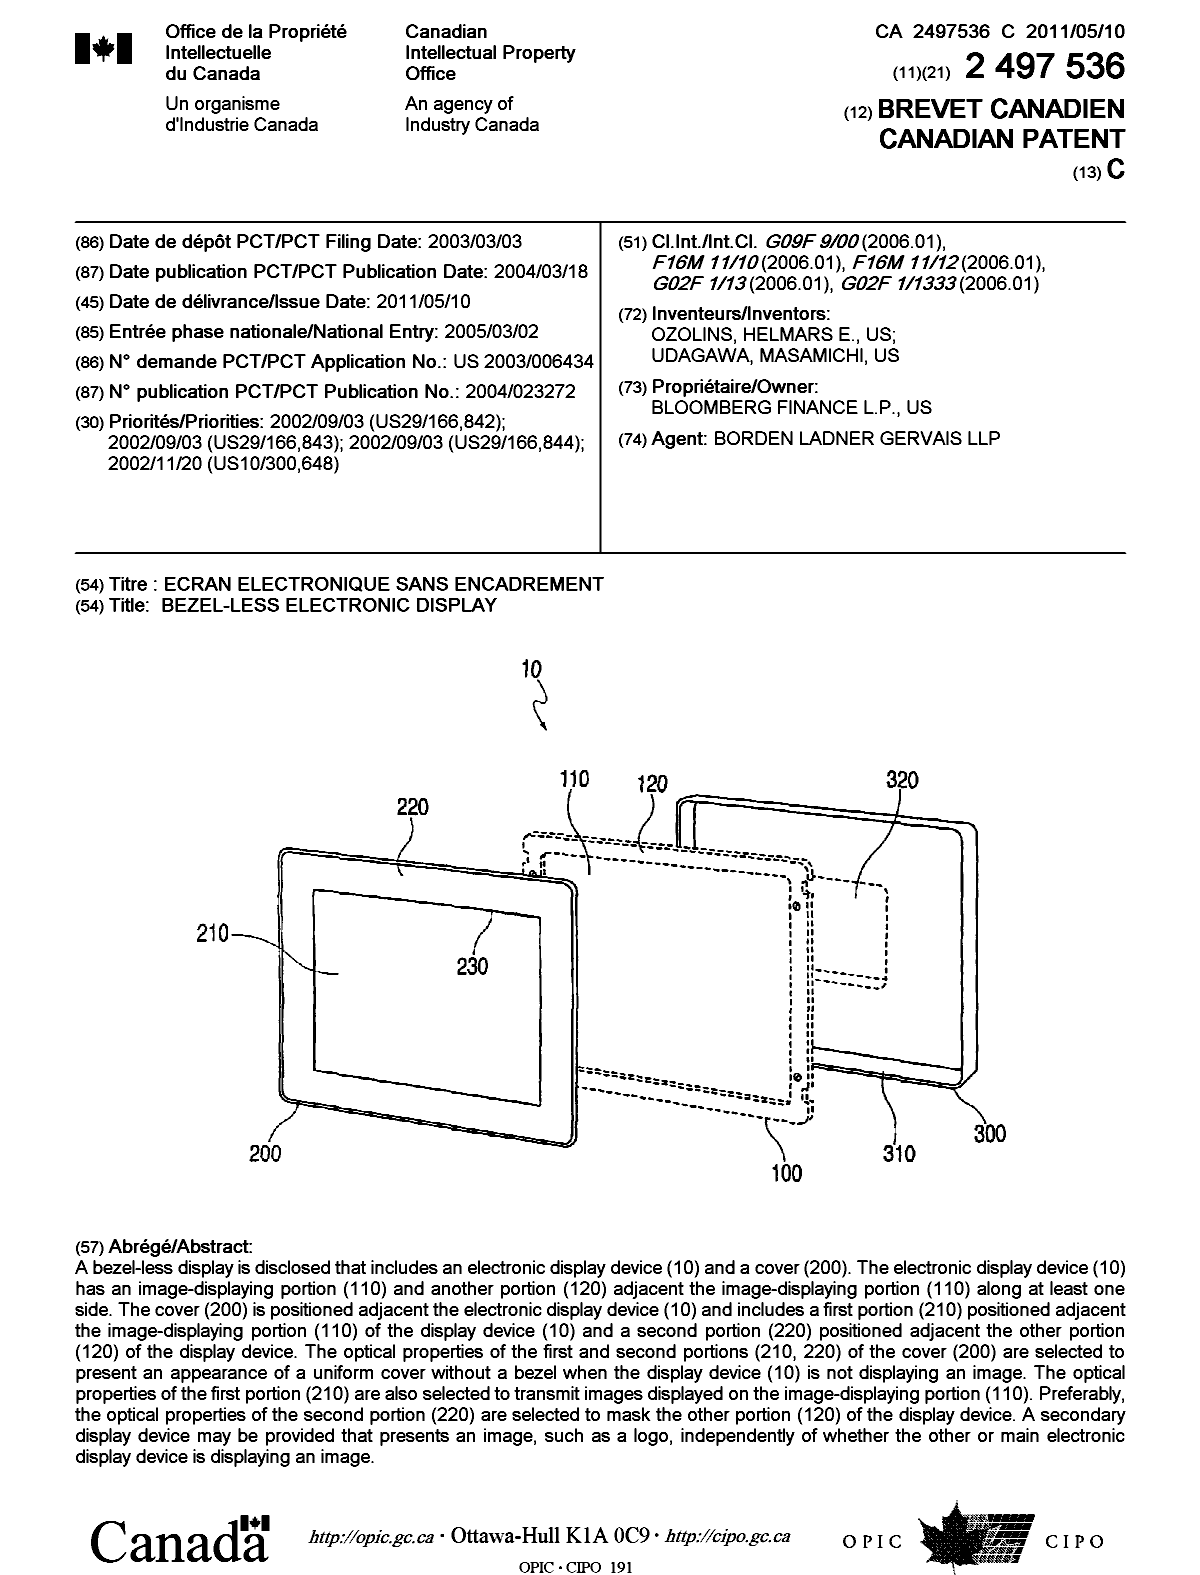 Canadian Patent Document 2497536. Cover Page 20110413. Image 1 of 1